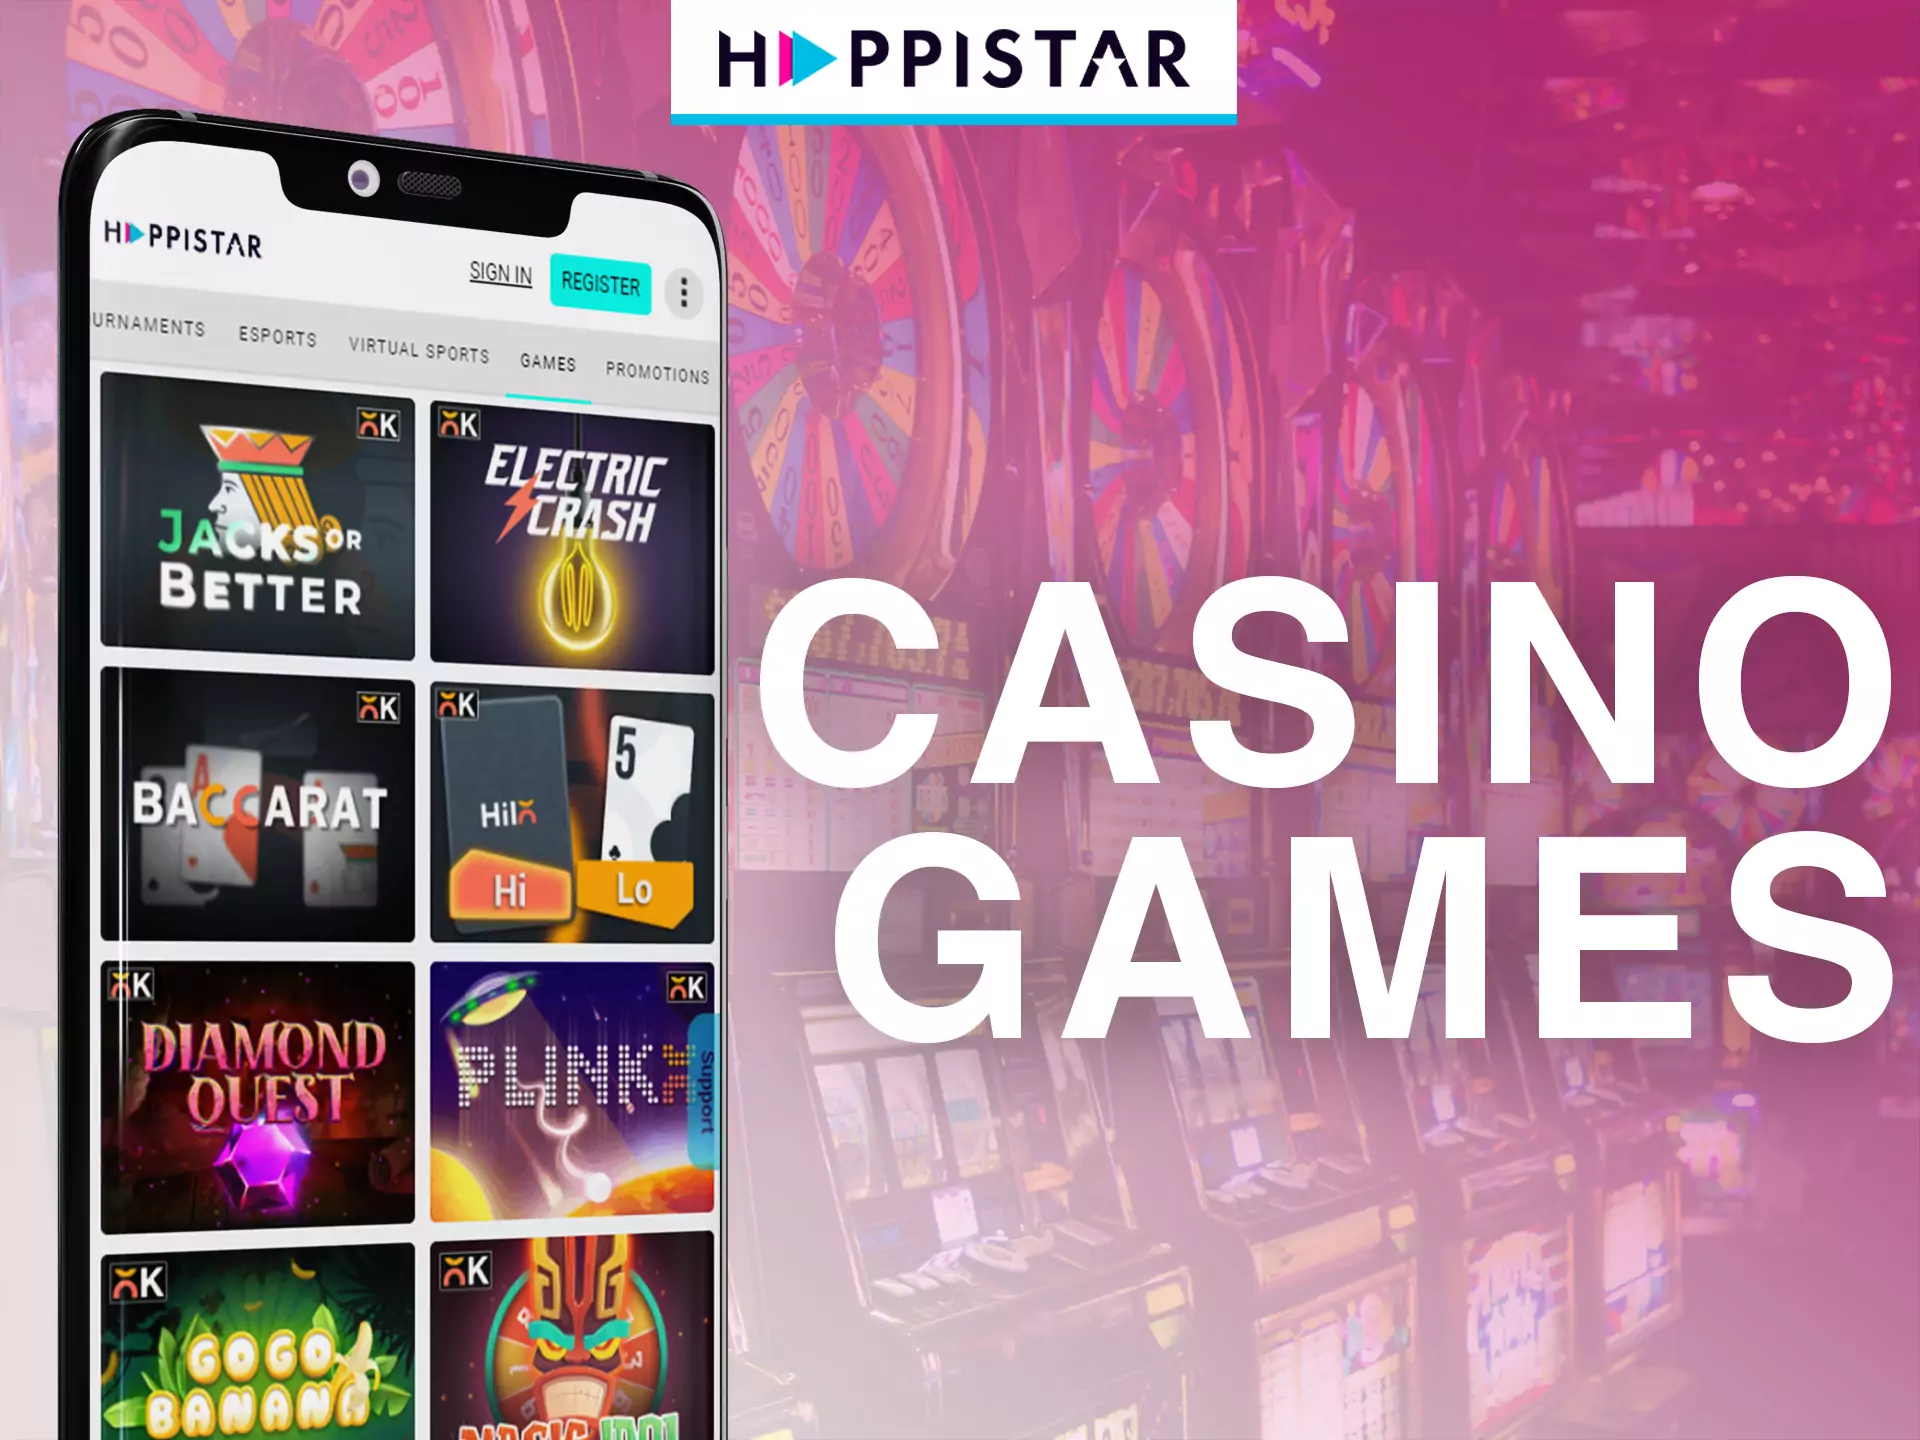 On Happistar, you find many slots and live games with dealers.